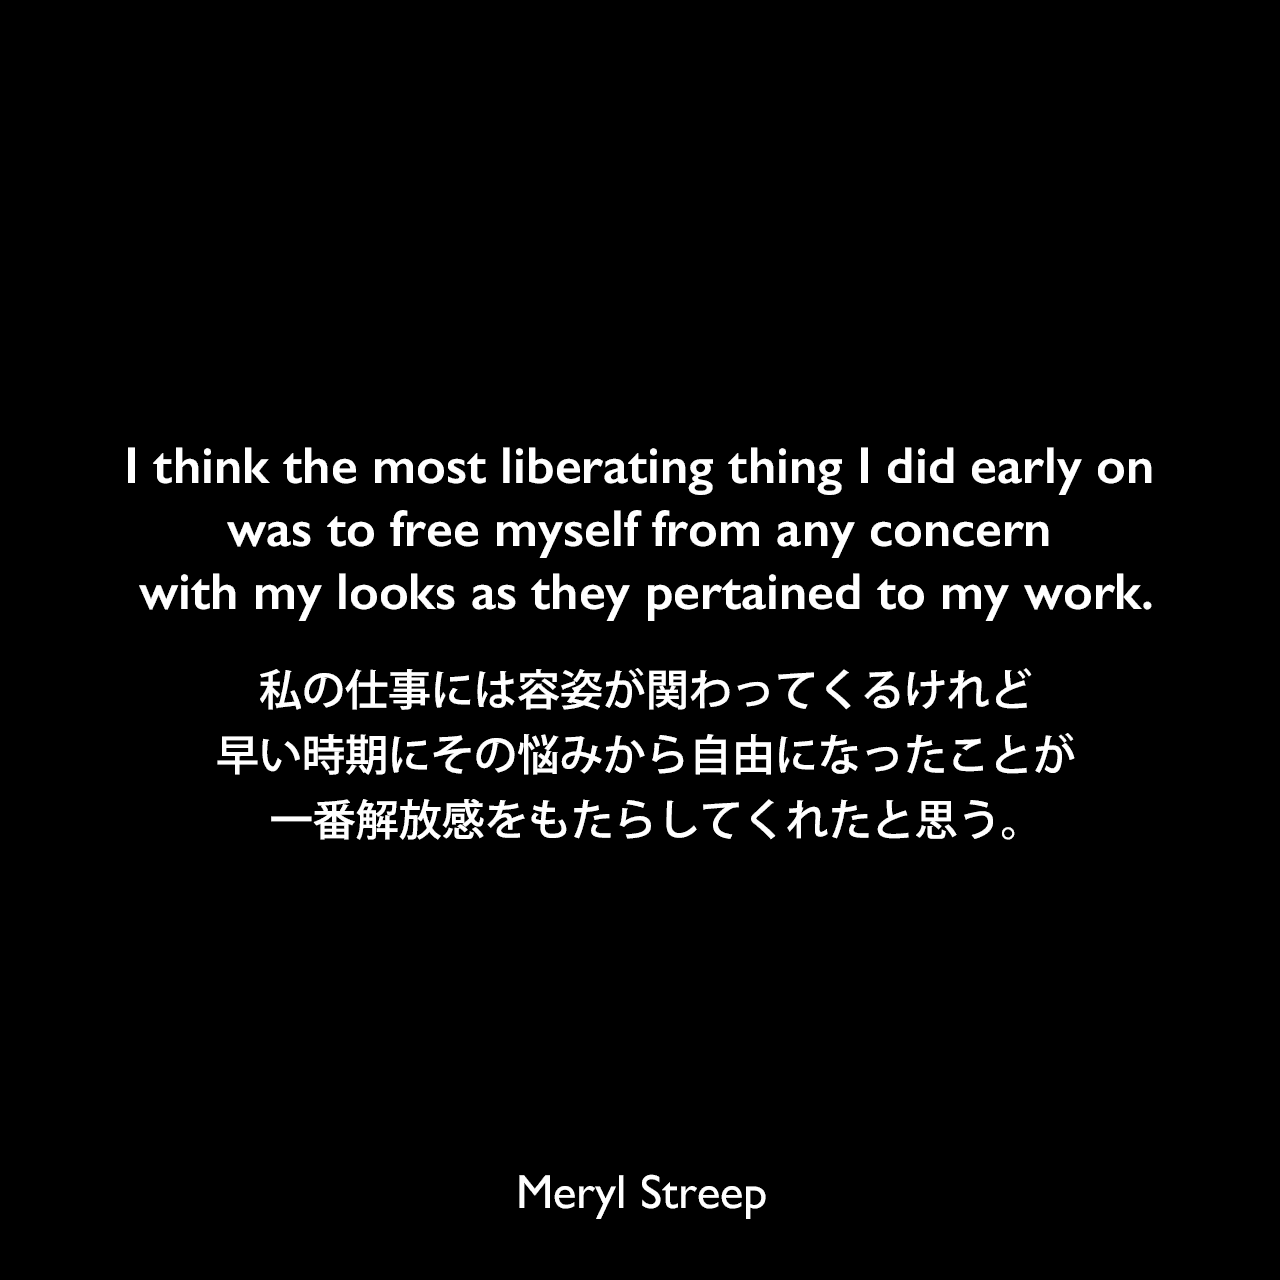 I think the most liberating thing I did early on was to free myself from any concern with my looks as they pertained to my work.私の仕事には容姿が関わってくるけれど、早い時期にその悩みから自由になったことが一番解放感をもたらしてくれたと思う。Meryl Streep